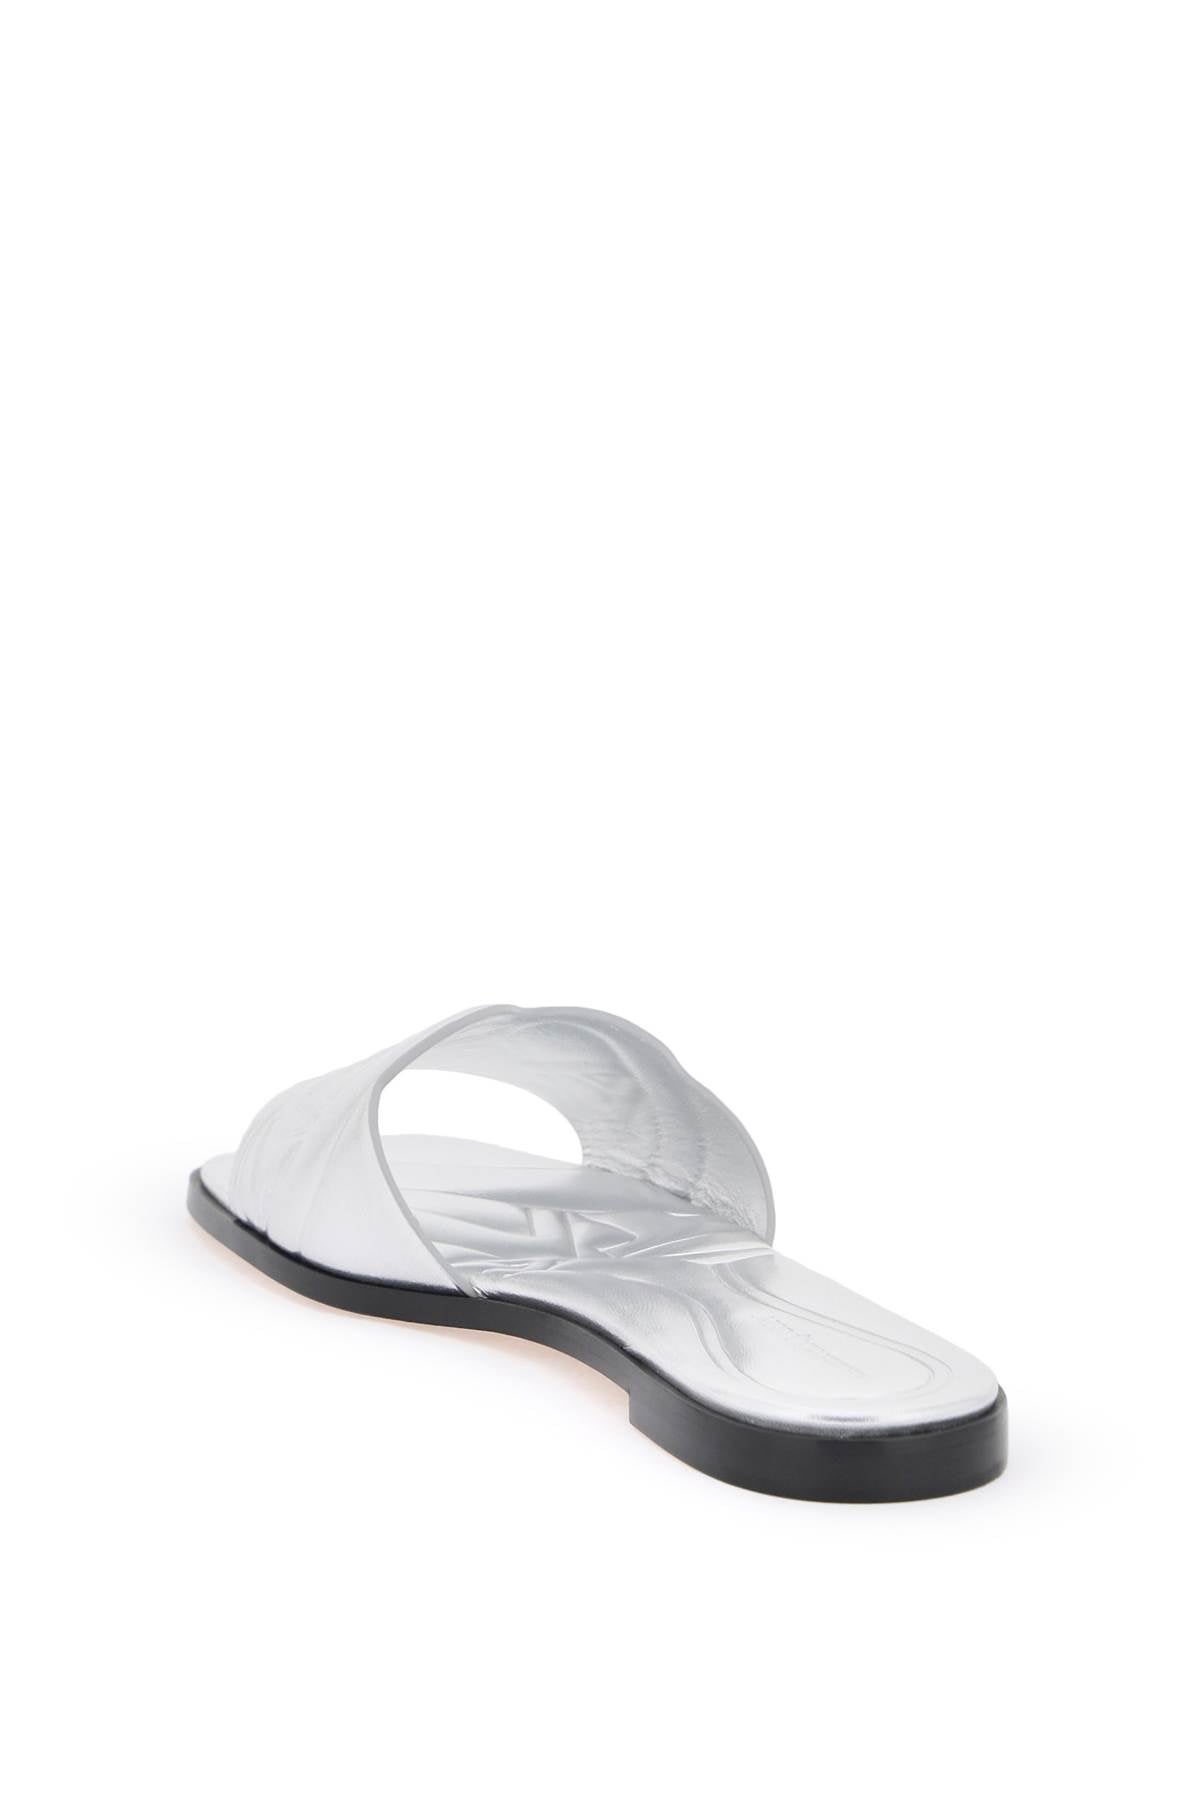 Alexander Mcqueen Laminated Leather Slides With Embossed Seal Logo Women